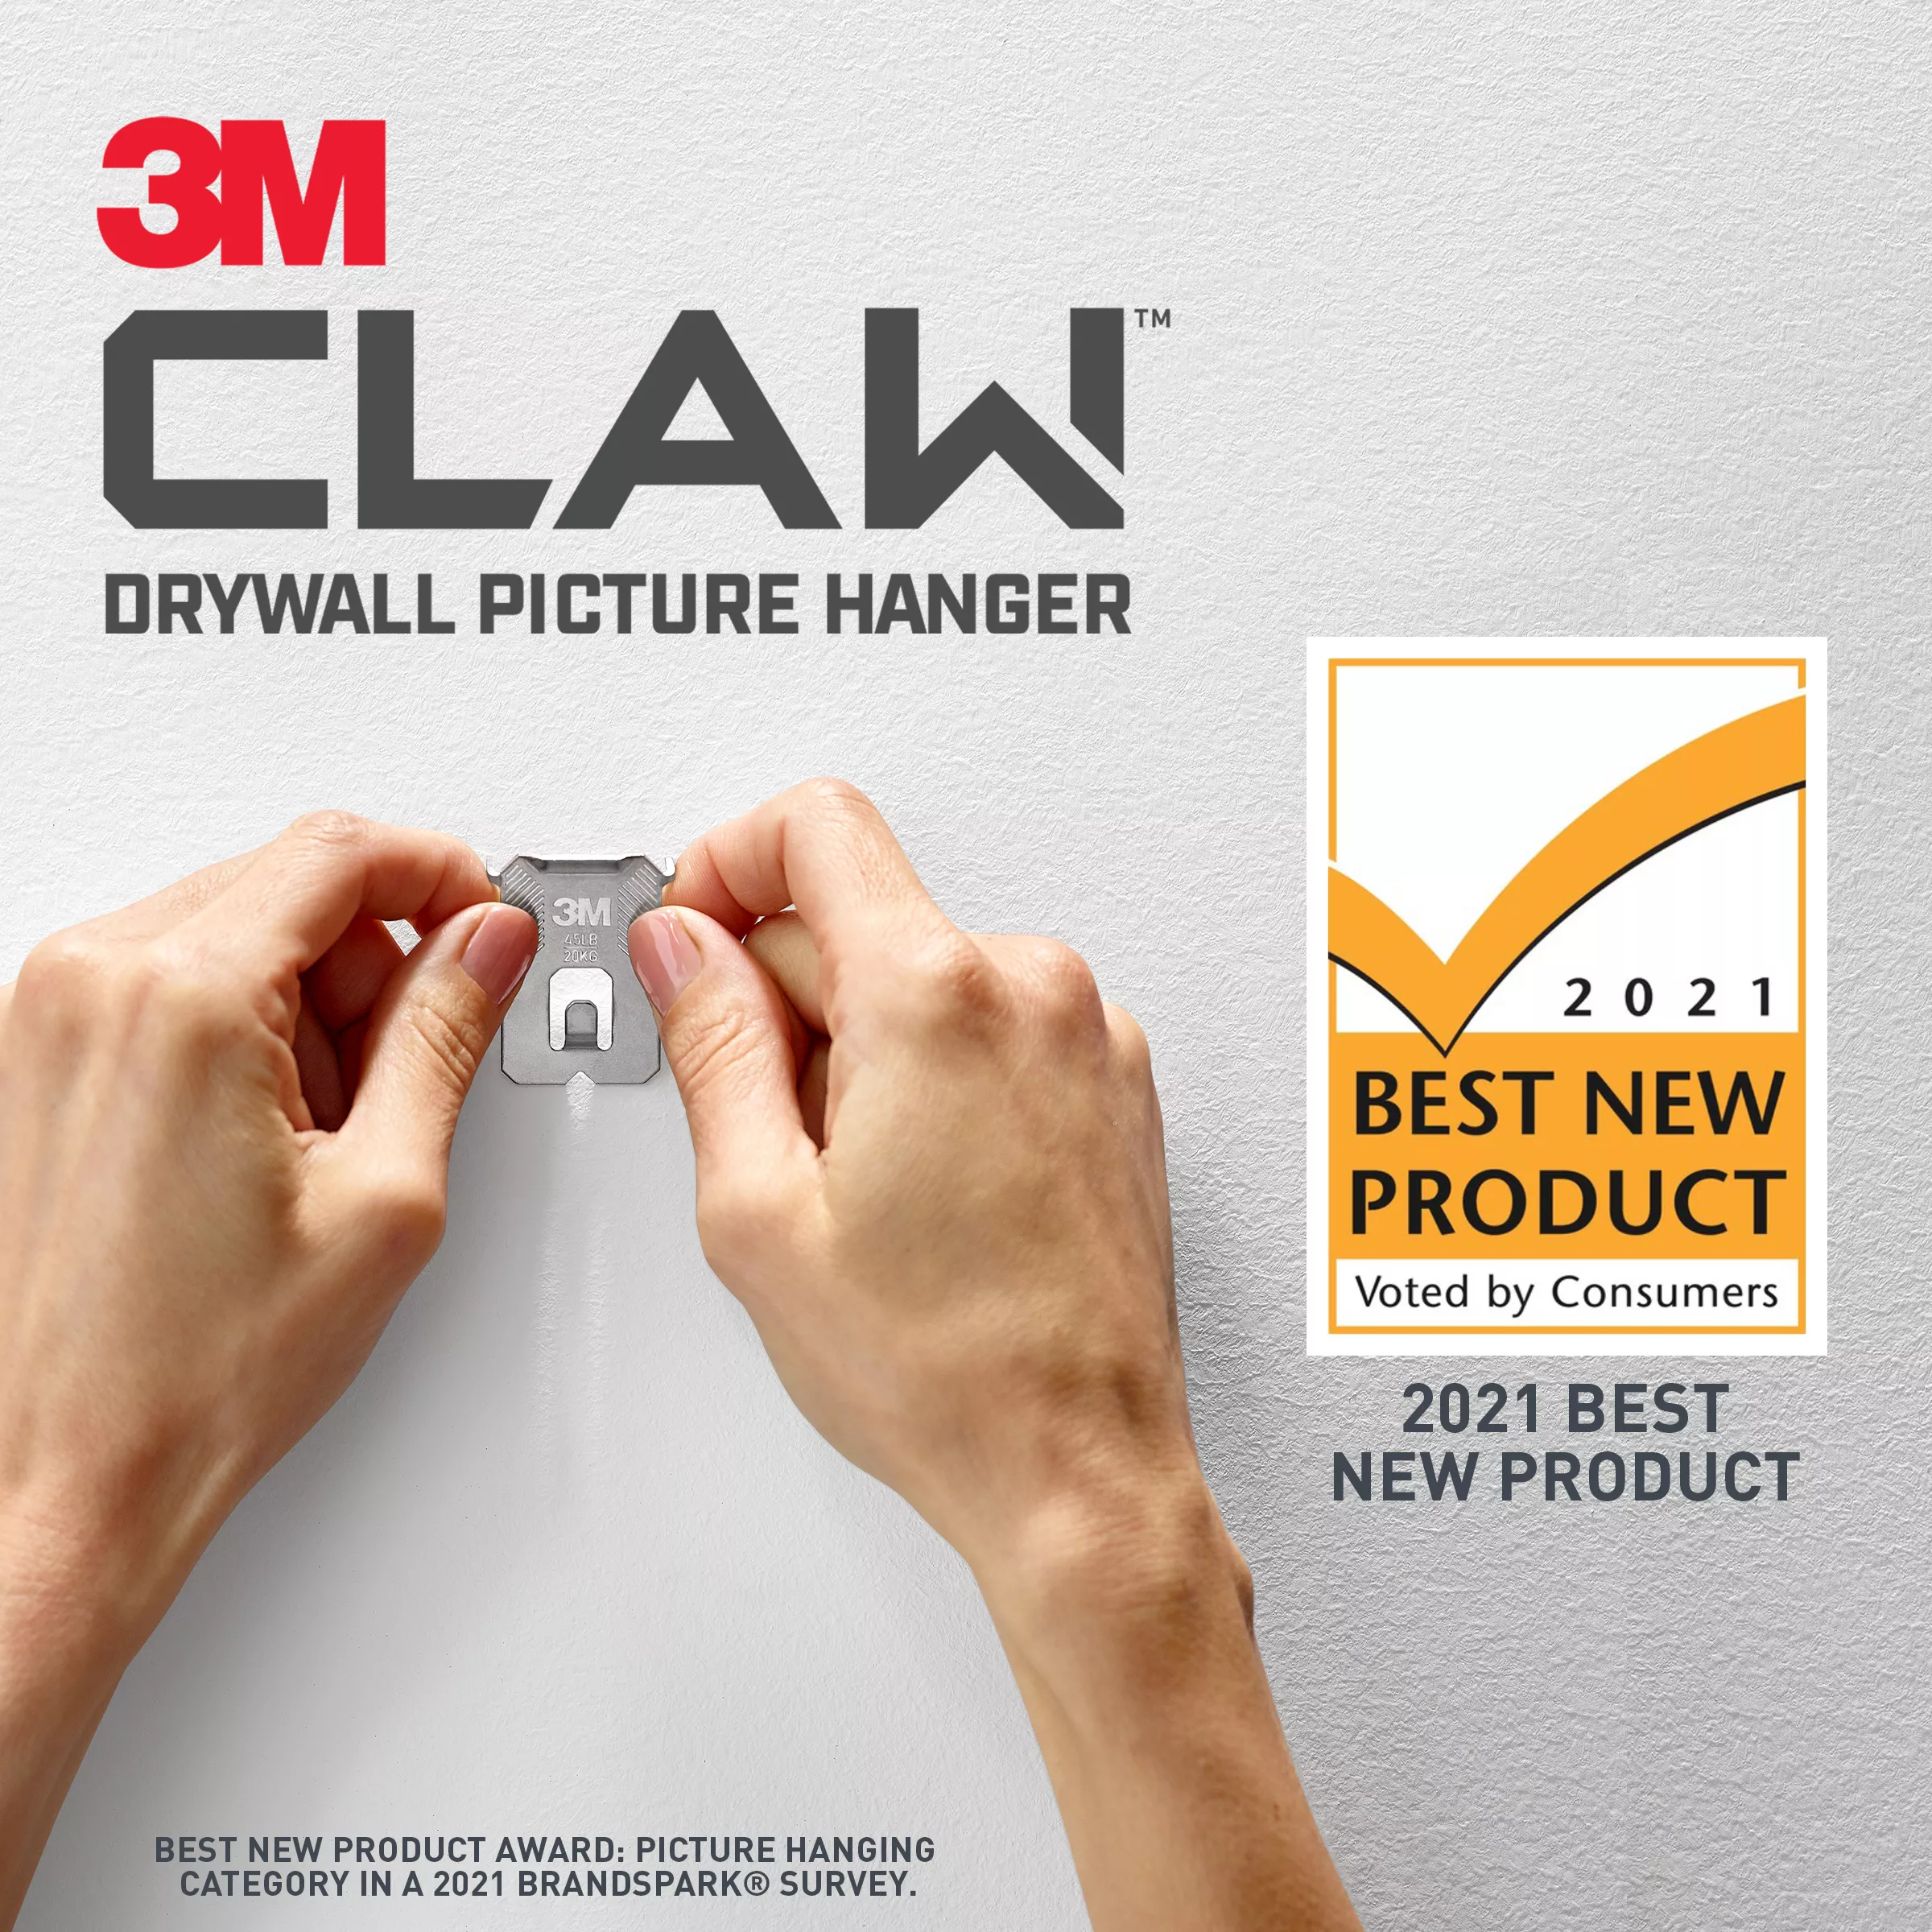 SKU 7100233165 | 3M™ CLAW™ Drywall Picture Hanger 15 lb with Temporary Spot Marker 3PH15M-5ES